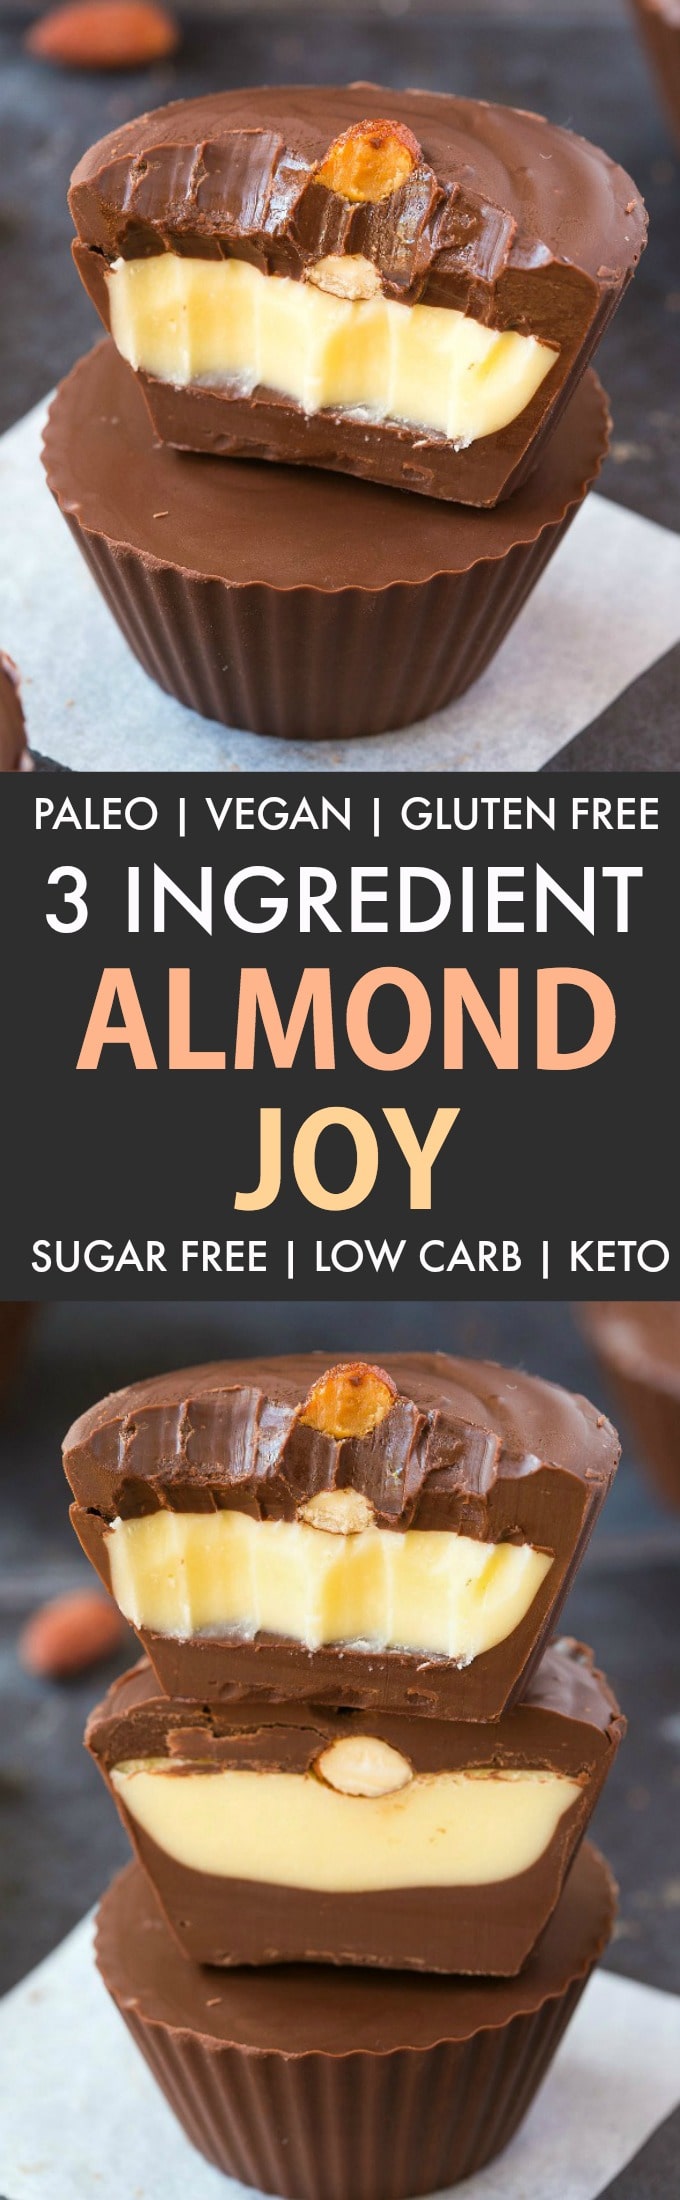 3 Ingredient Homemade Almond Joy (Paleo, Vegan, Sugar Free)- An easy, homemade three ingredient healthy almond joy copycat recipe which is low carb, dairy free and gluten free. Coconut, chocolate and almonds combined! {v, gf, p recipe}- thebigmansworld.com #almondjoy #keto 